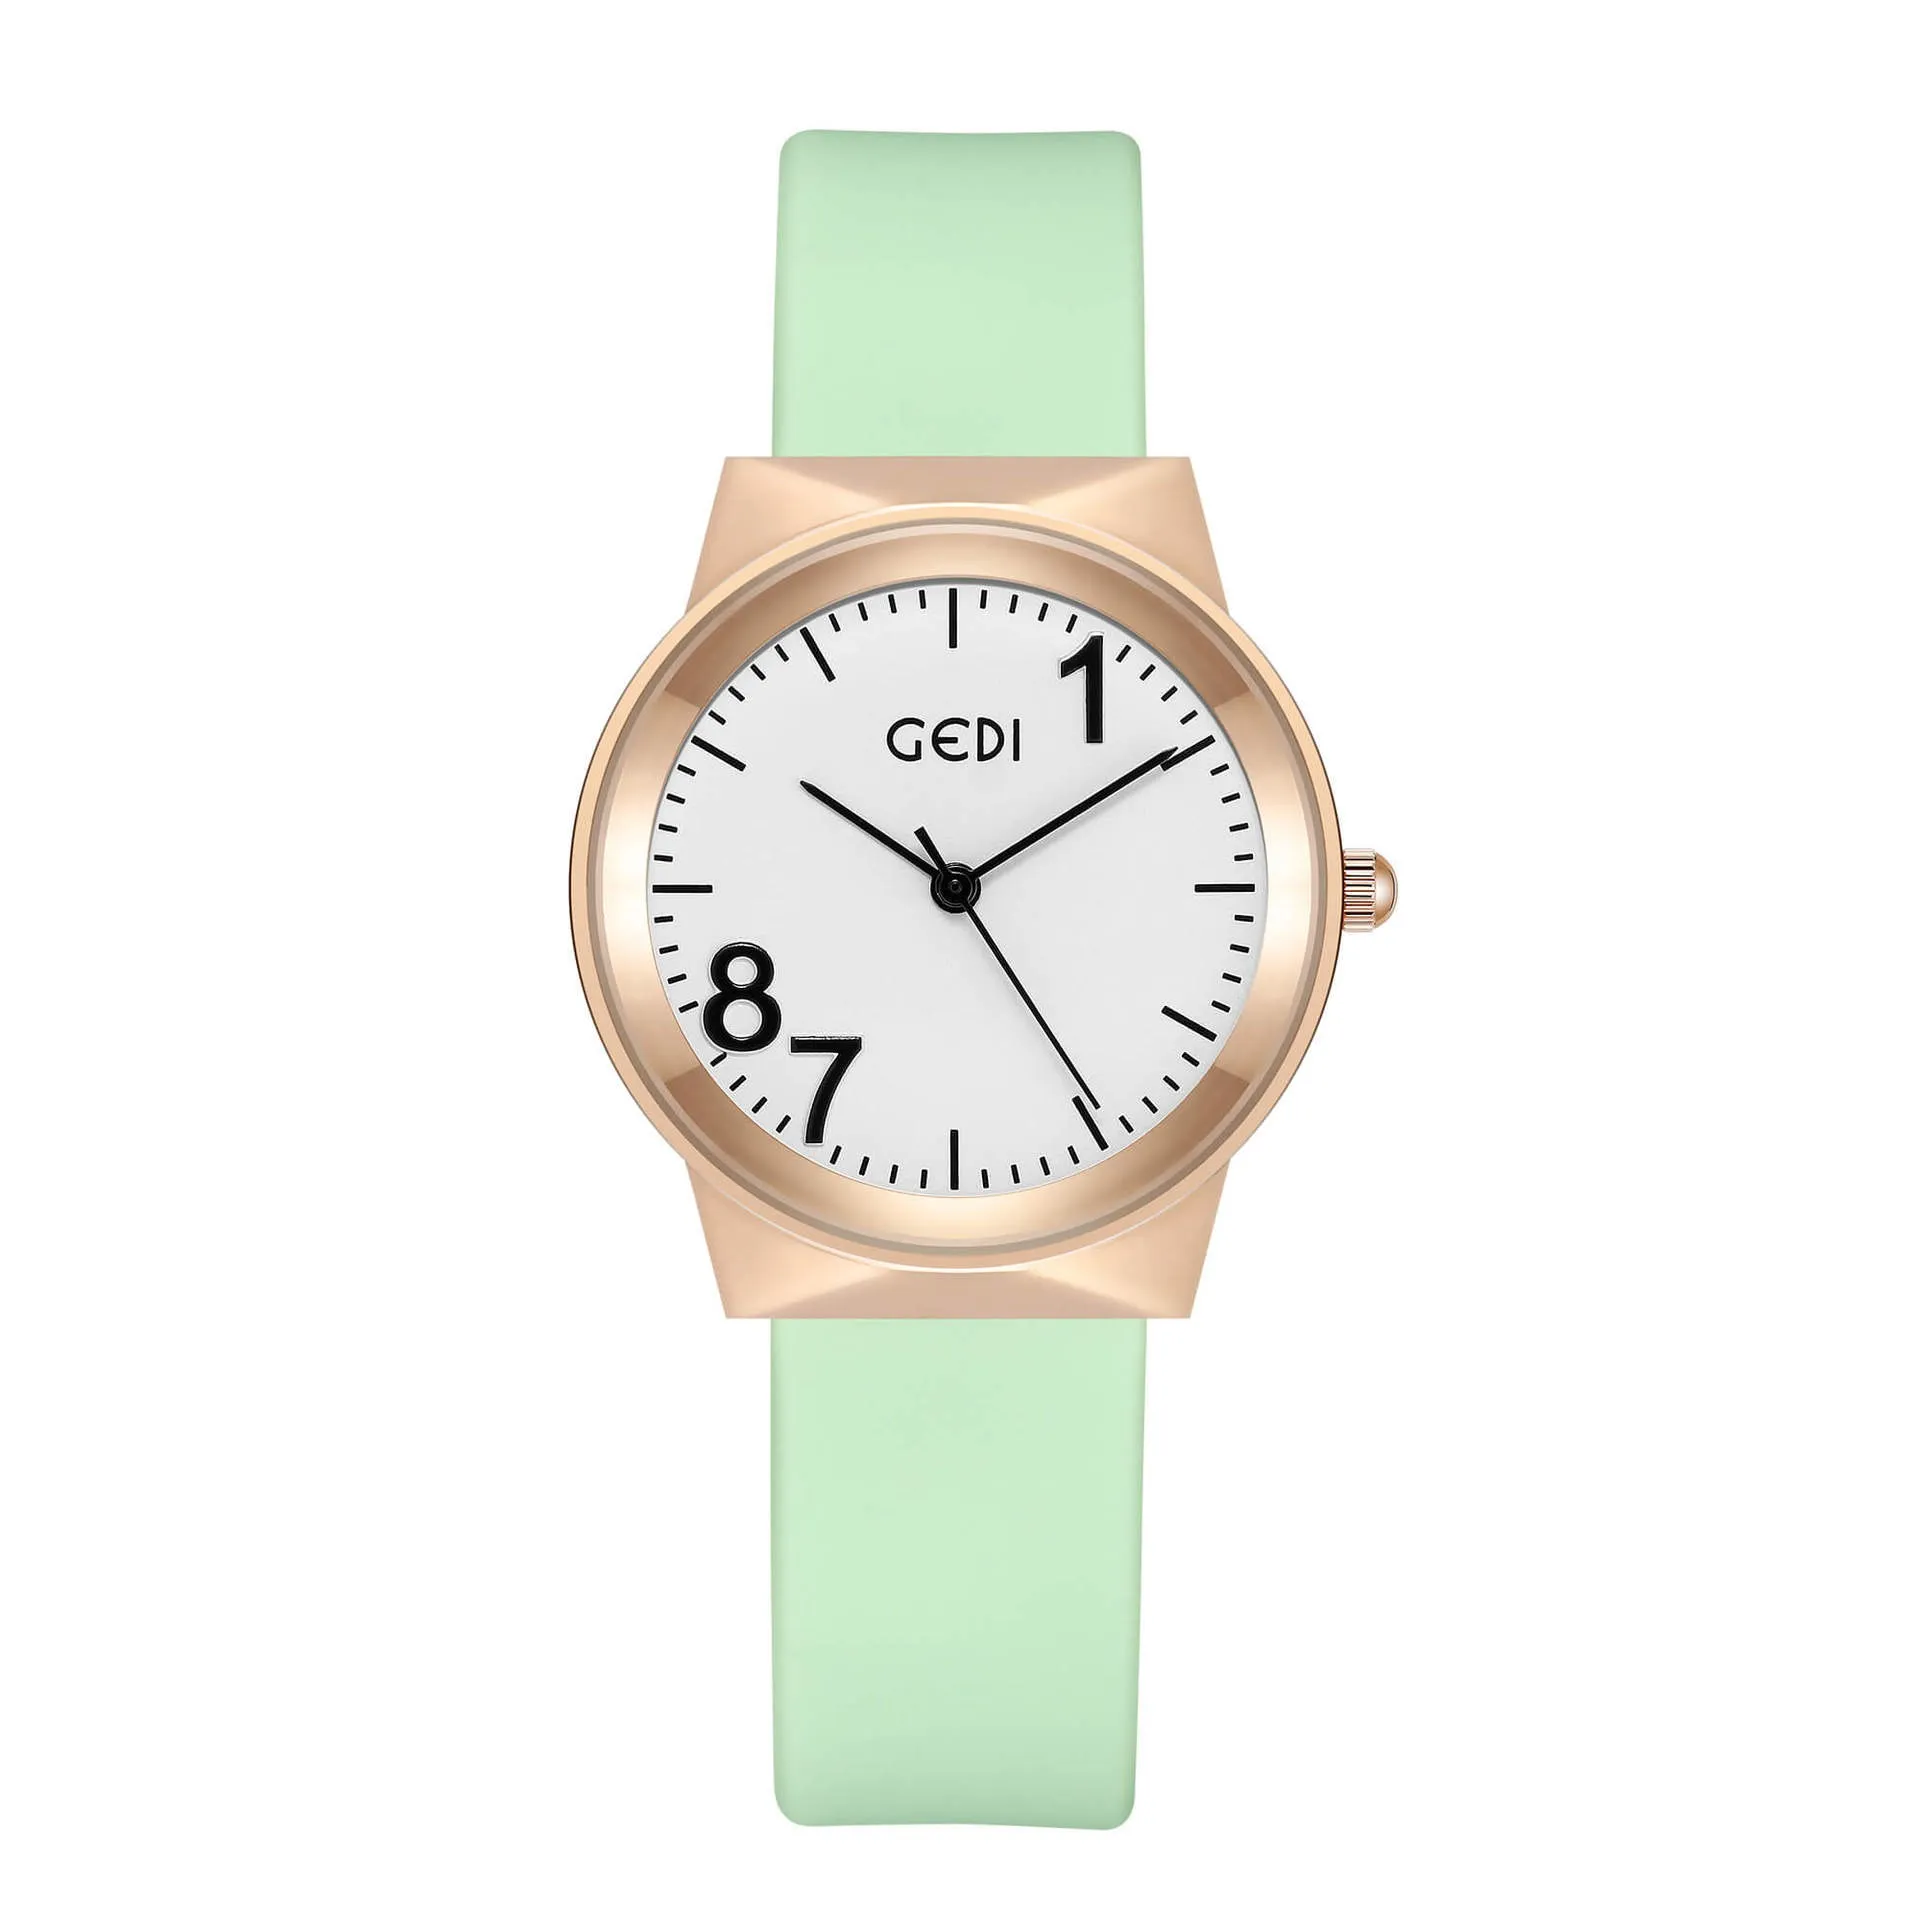 Womens Watch Watches High Quality Luxury Quartz-Batterycasual Silicone Waterproof 33mm Watch A7